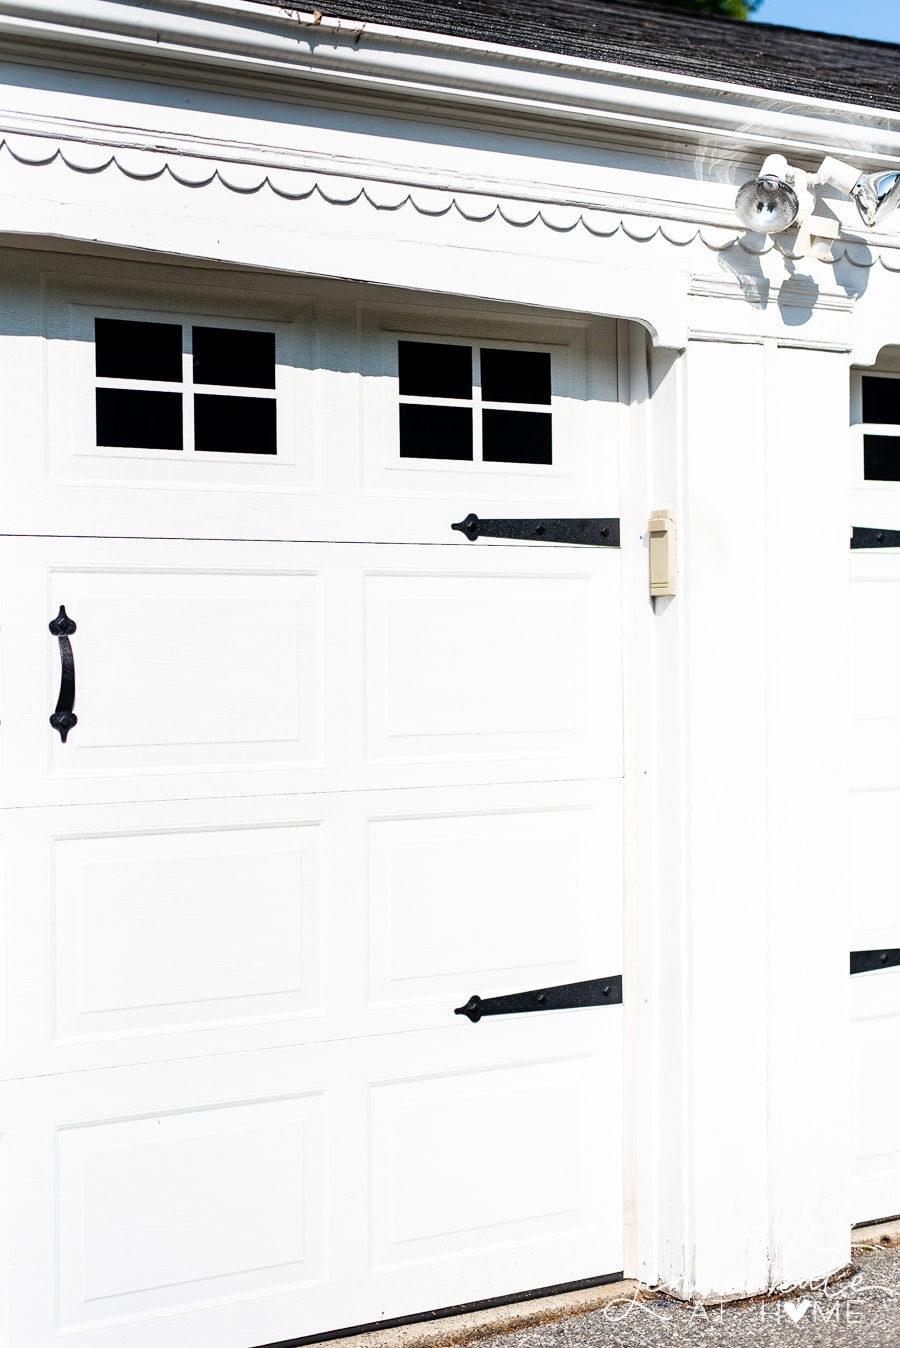 The upgraded garage doors with black vinyl decals for windows and plastic hardware attached with magnets